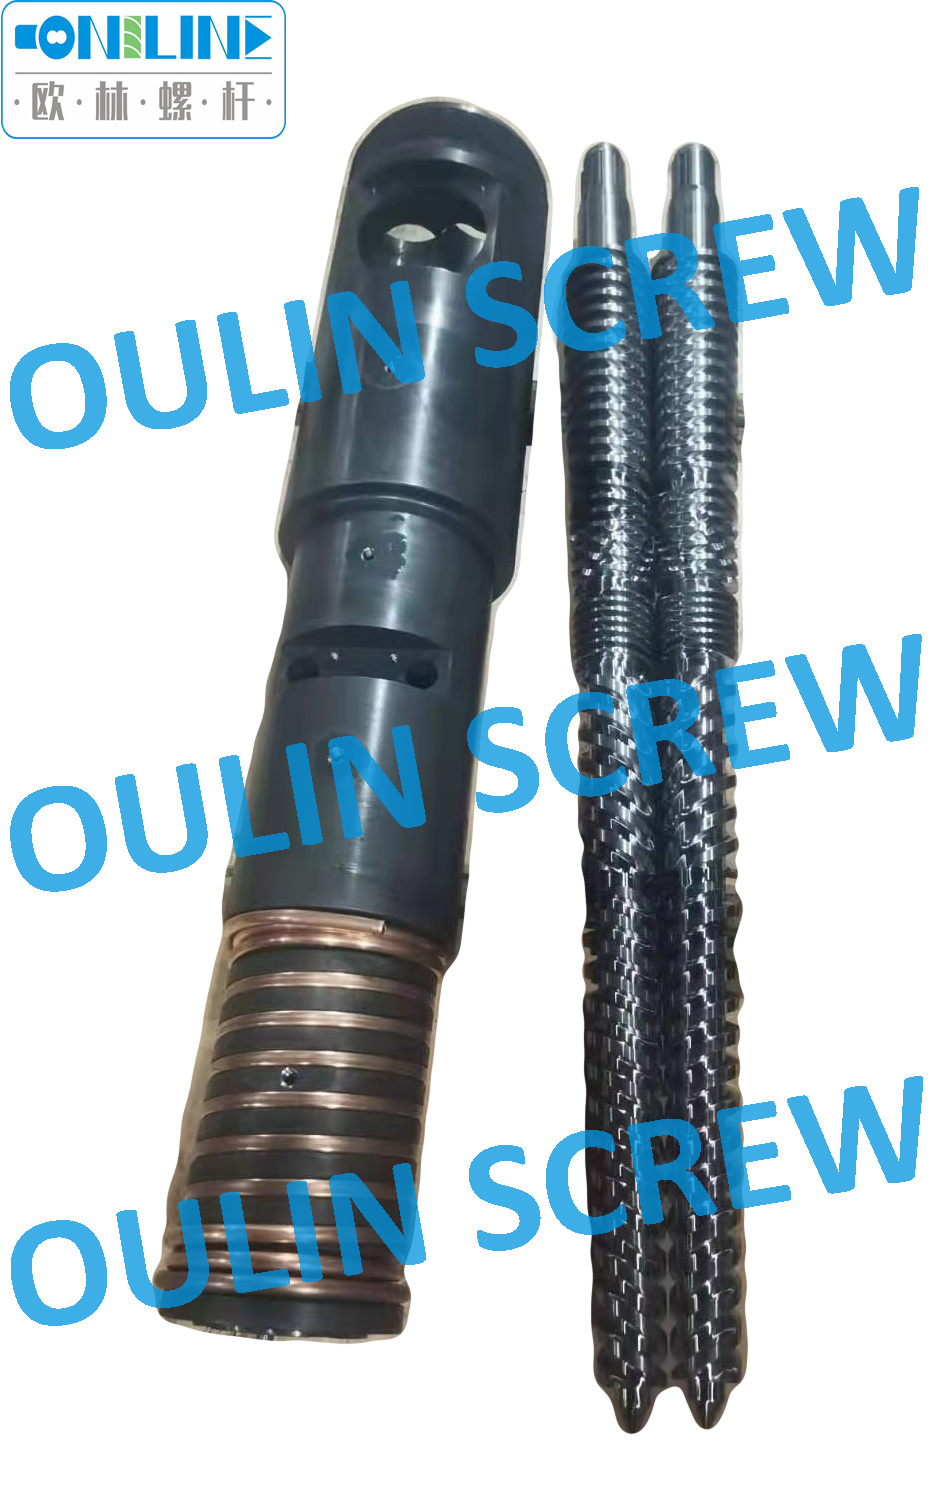 Sj55/110 Twin Conical Screw Barrel for PVC Sheet, Pipe, Profiles Extruder